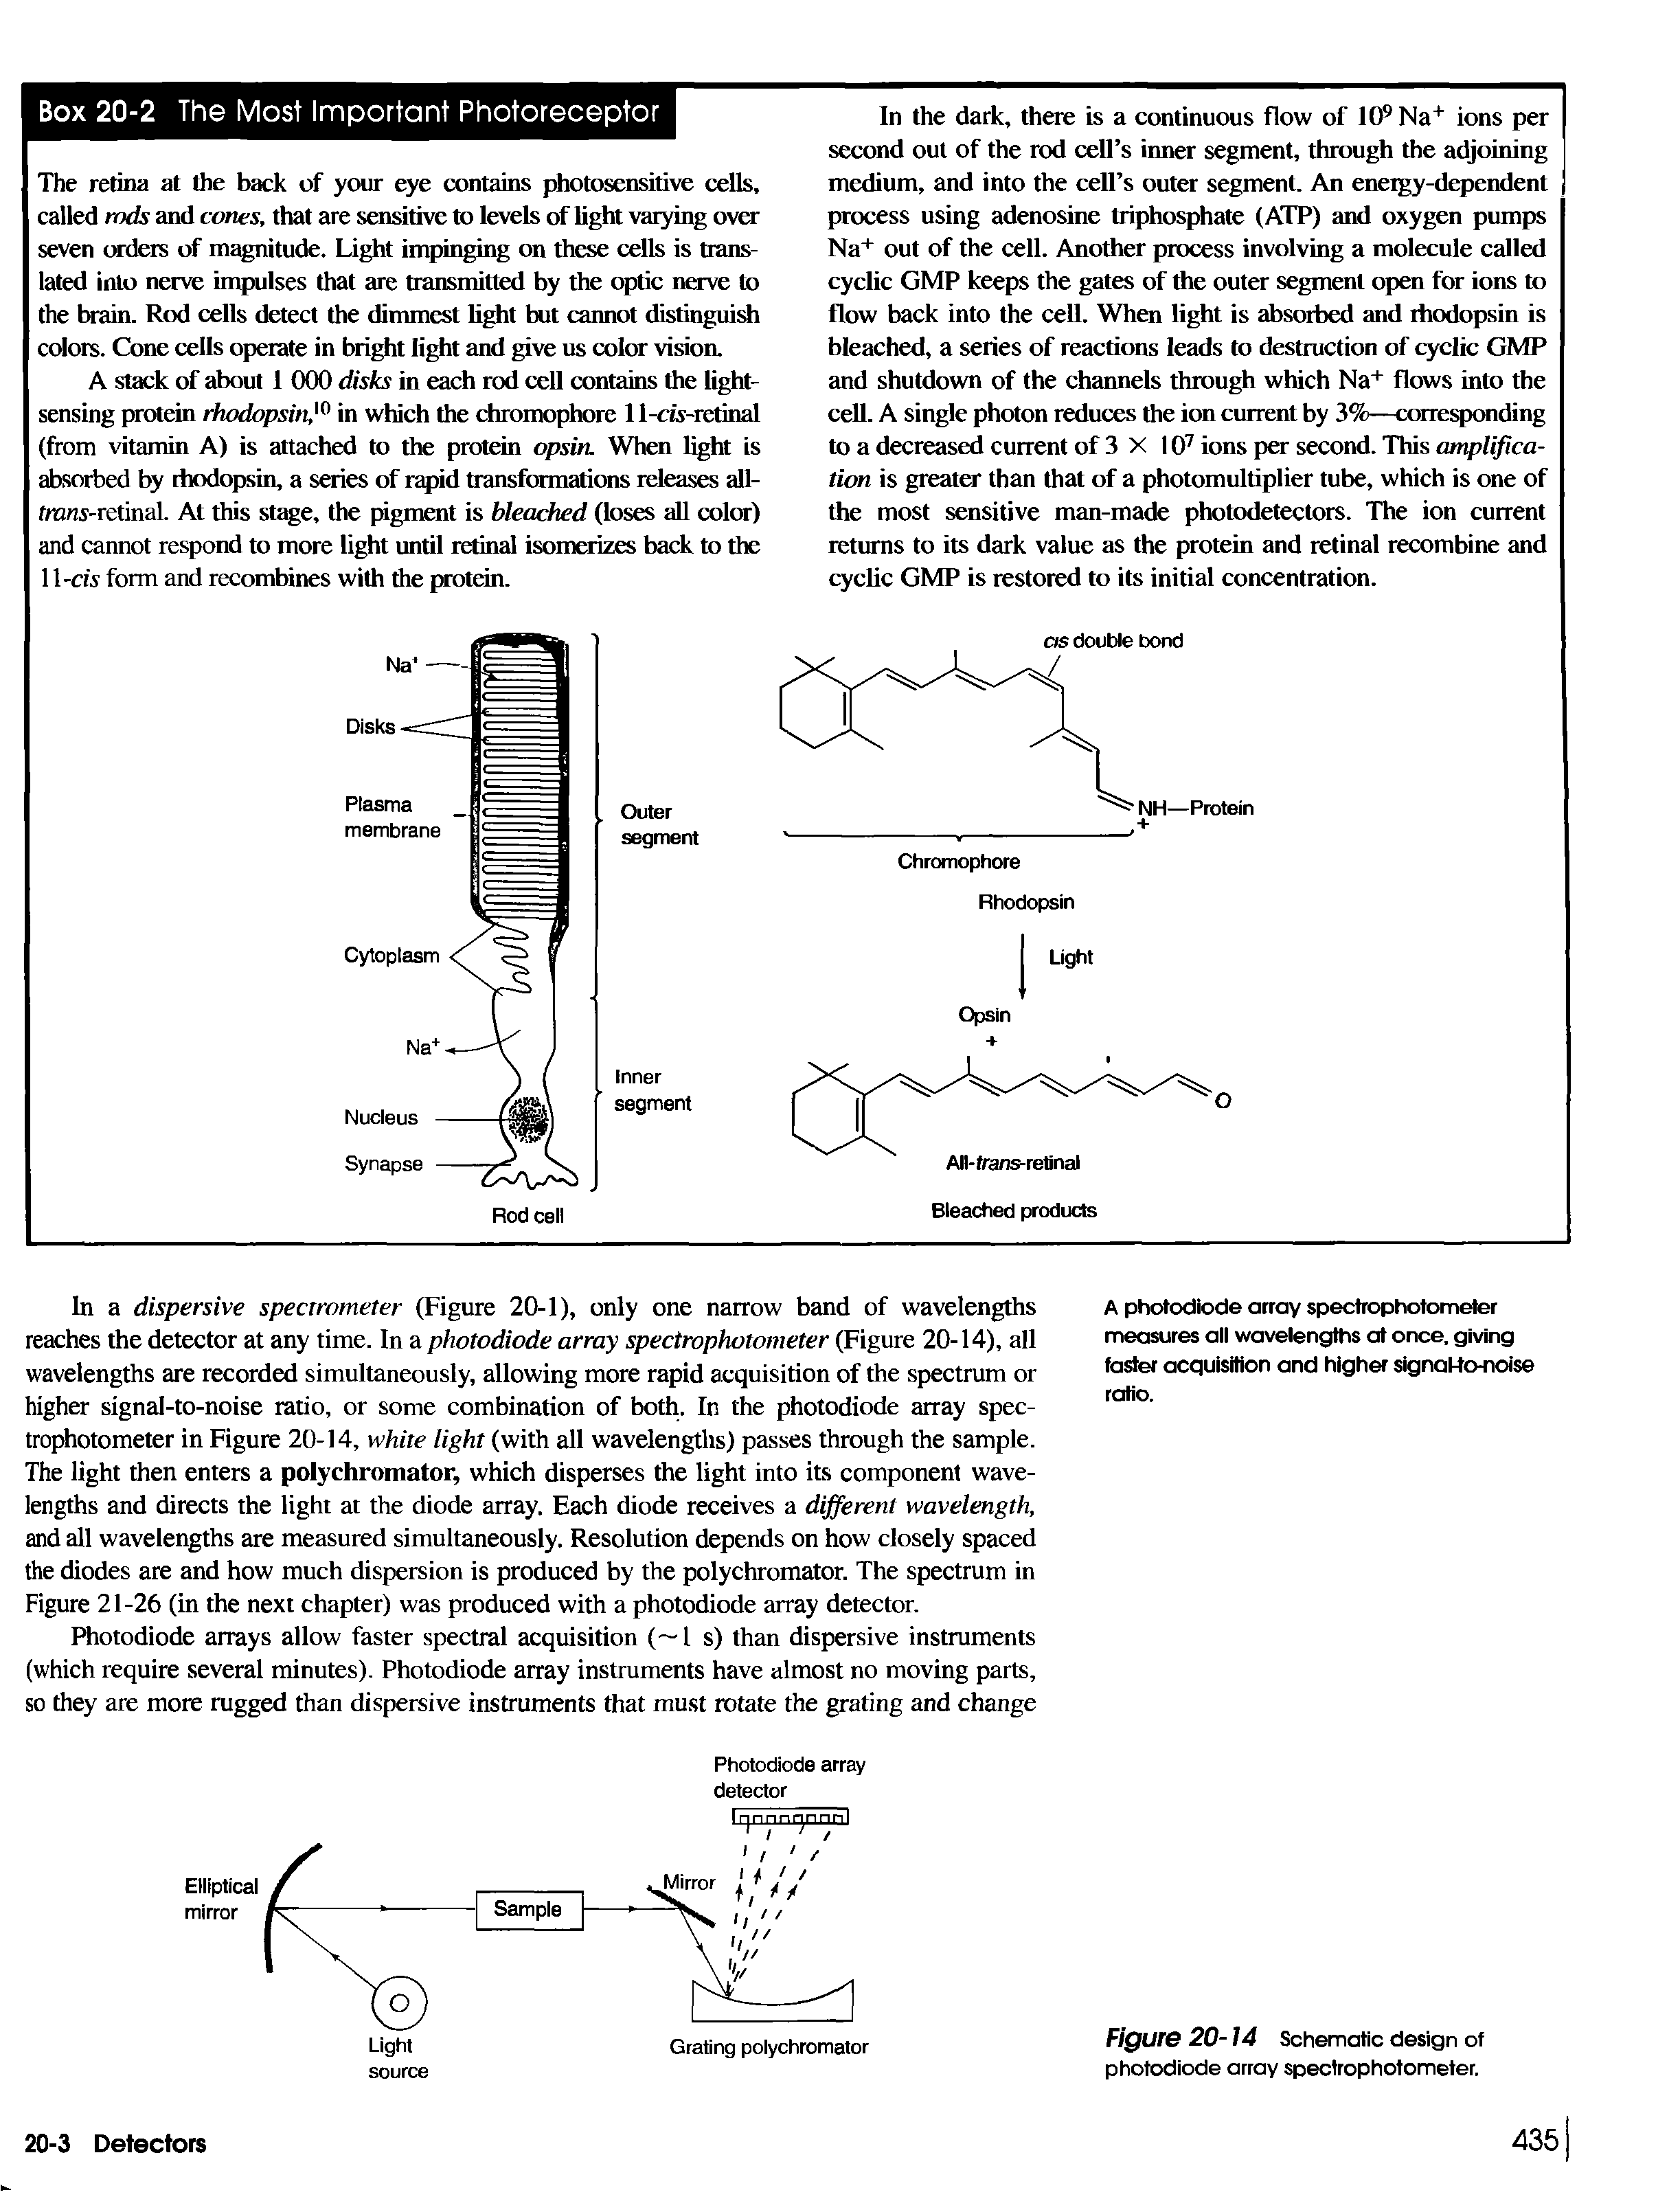 Figure 20-14 Schematic design of photodiode array spectrophotometer.